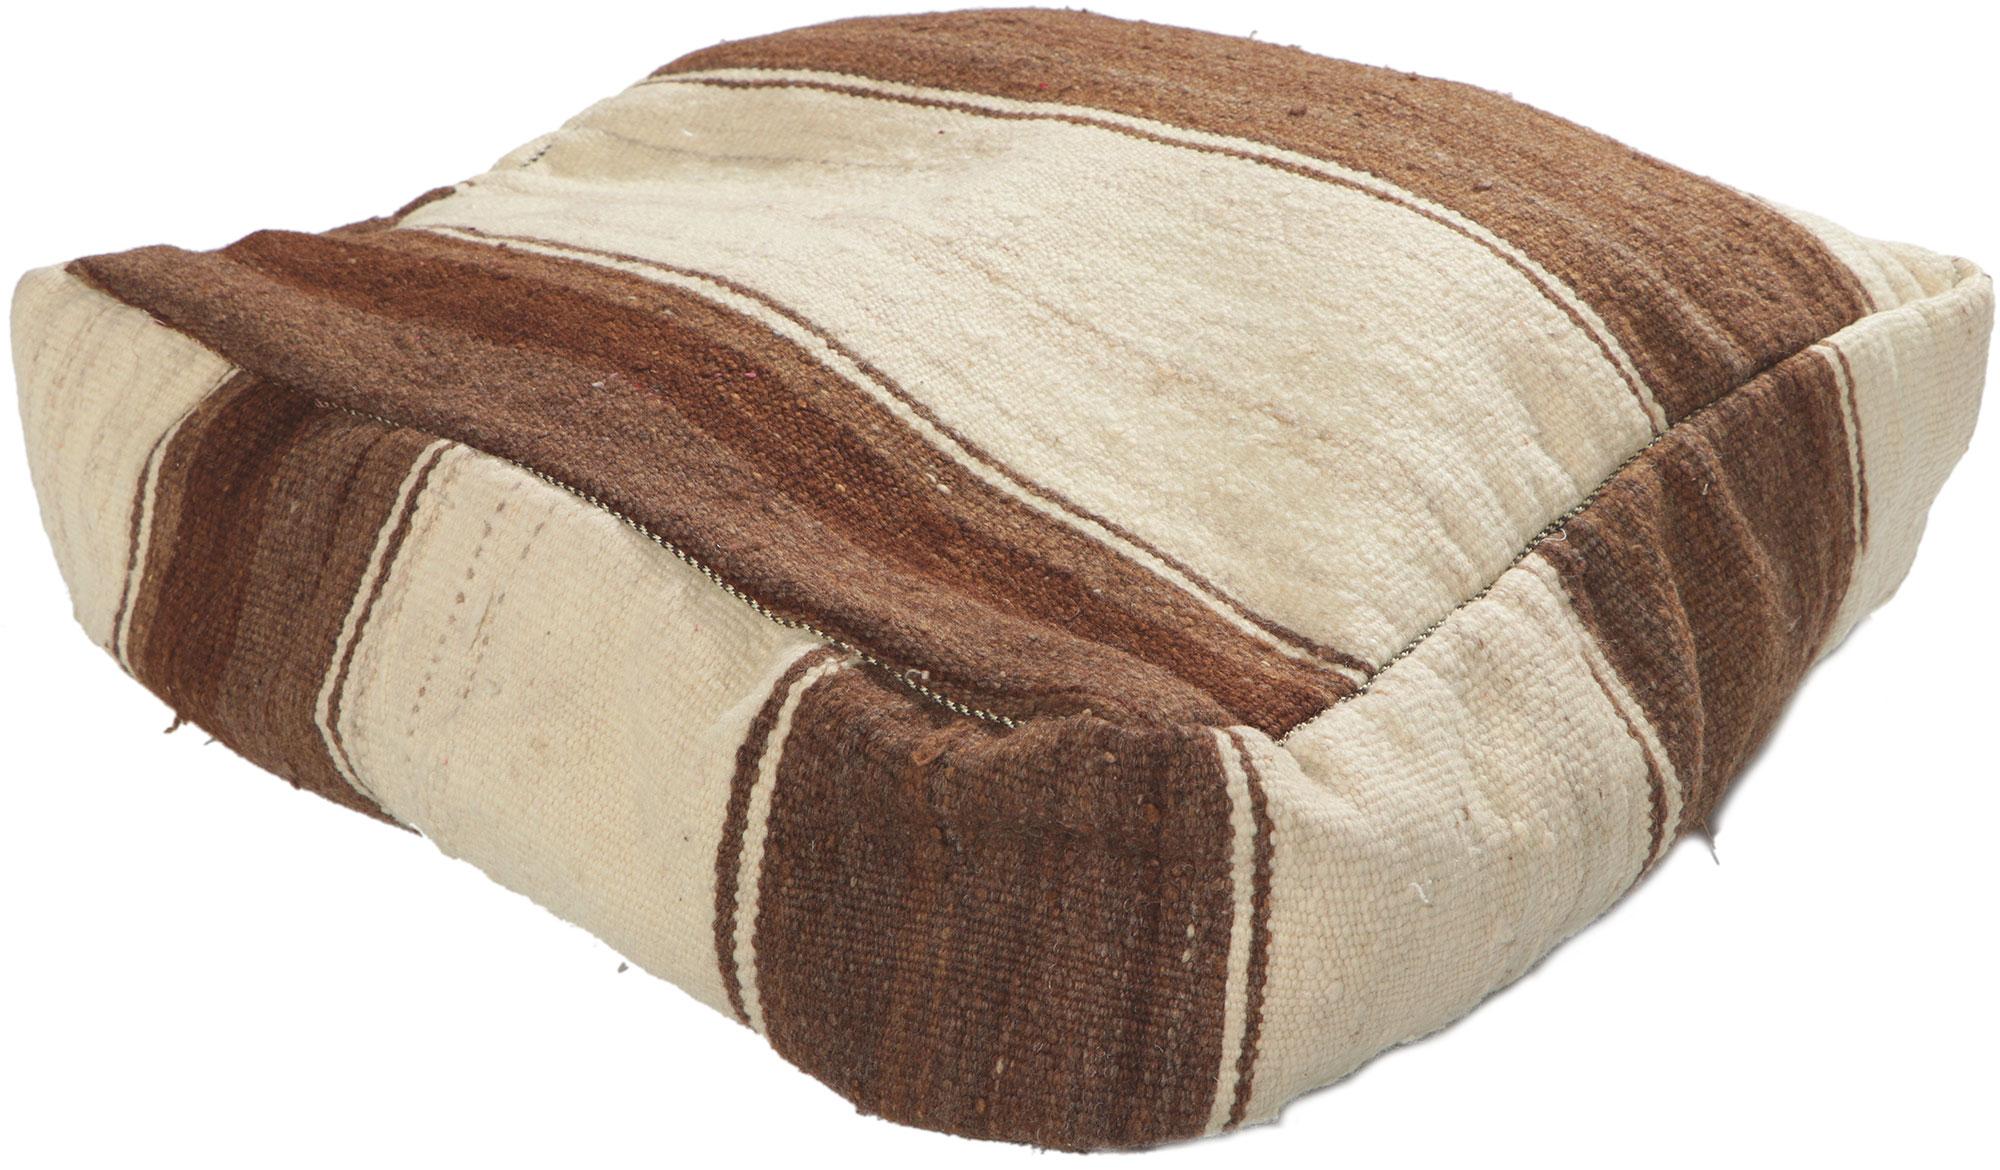 78411 Moroccan Vintage Kilim Pouf Ottoman, 2 x 2 x 1.
Emanating nomadic charm with elements of comfort and functional versatility, this vintage Moroccan pouf conjures the spirit of Morocco. Made by talented artisans from the Atas Mountains of